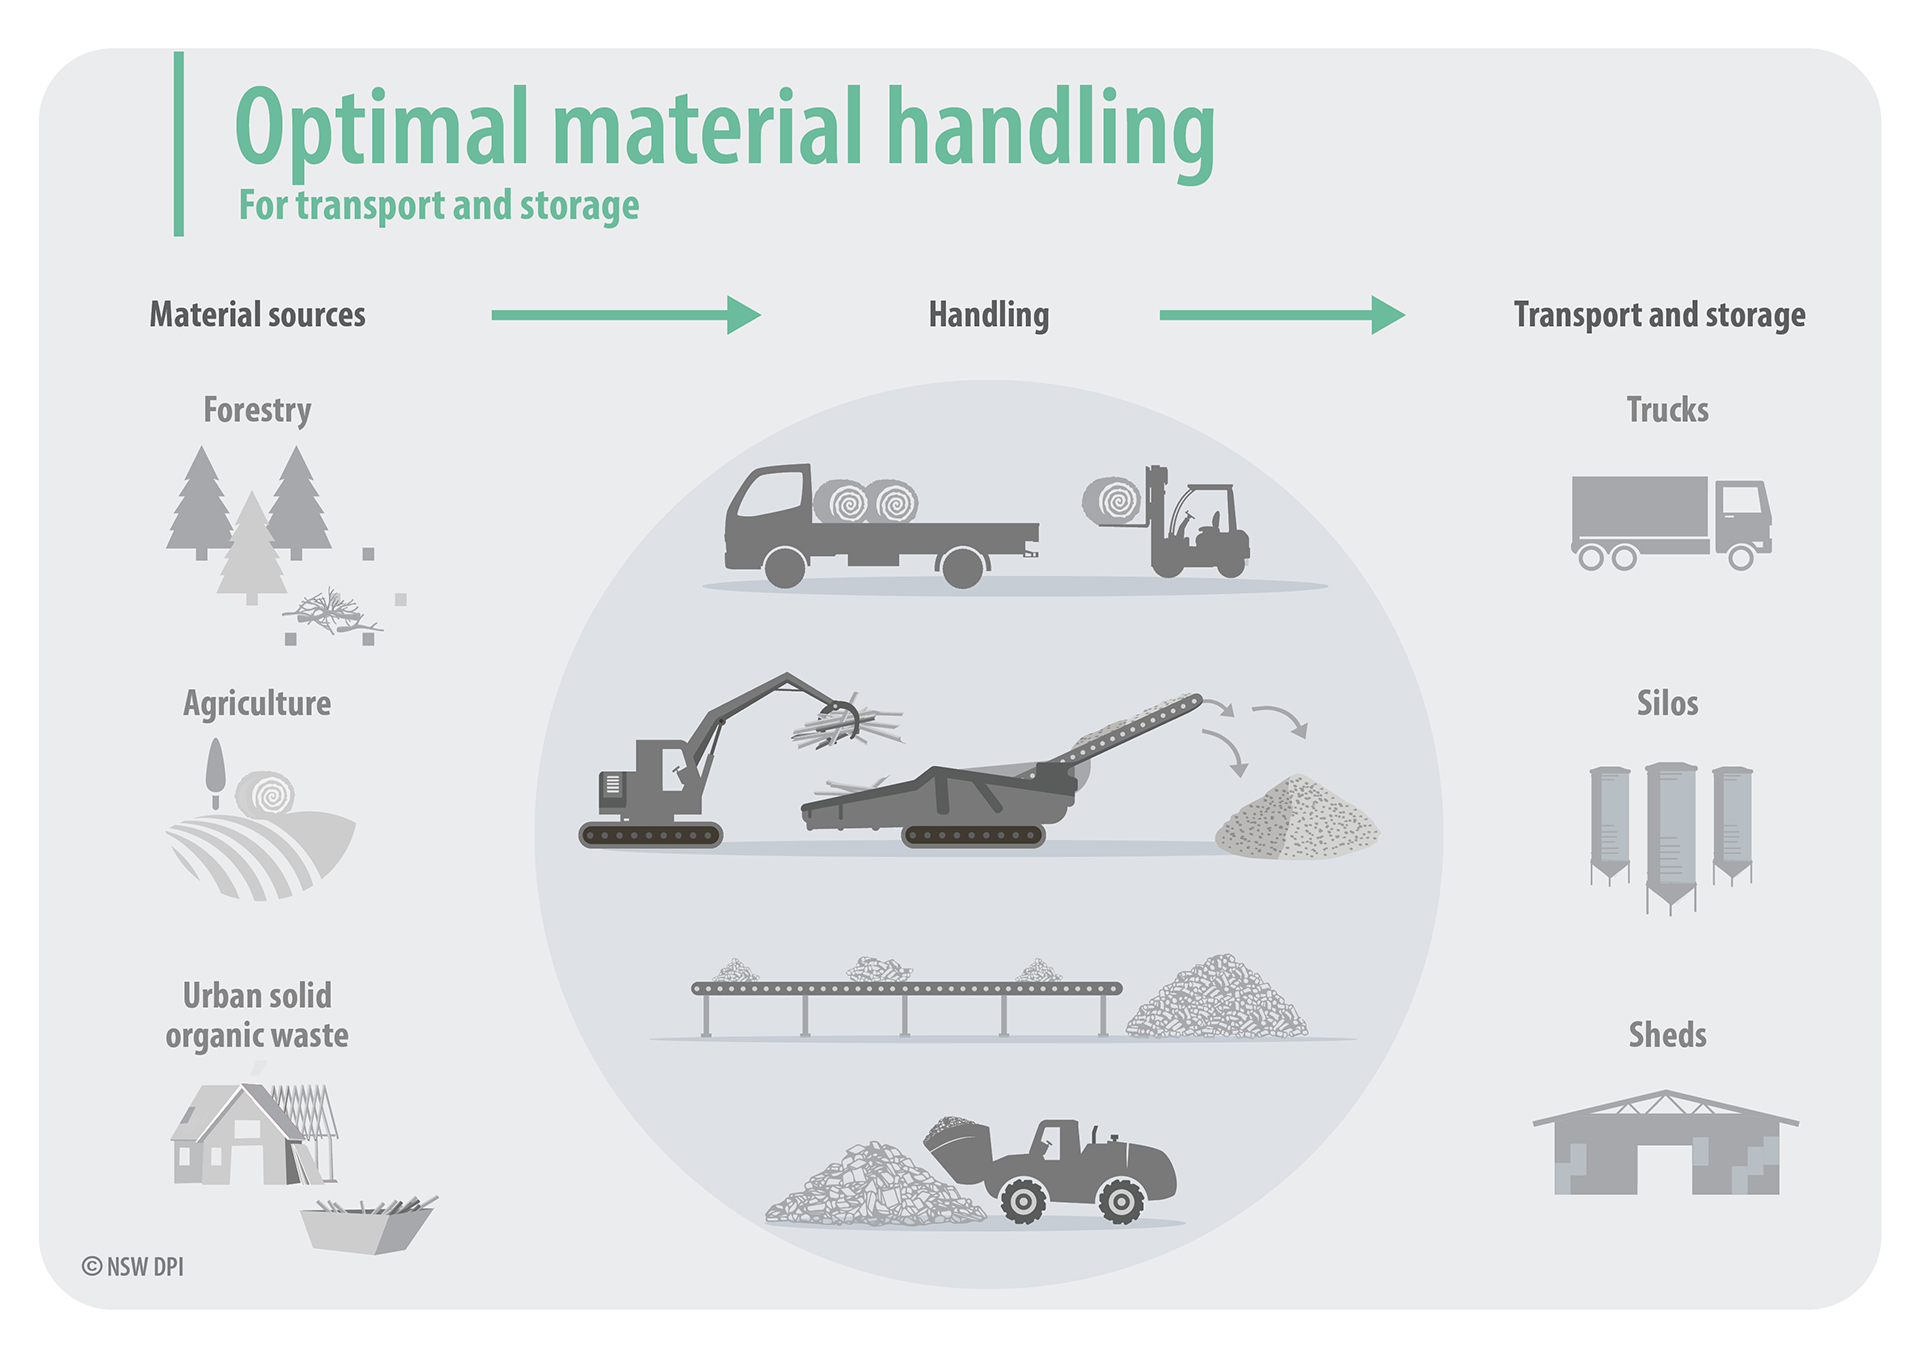 Infographic of optimal material handling - for transport and storage. This document is not fully accessible, please contact fabiano.ximenes@dpi.nsw.gov.au for more information.